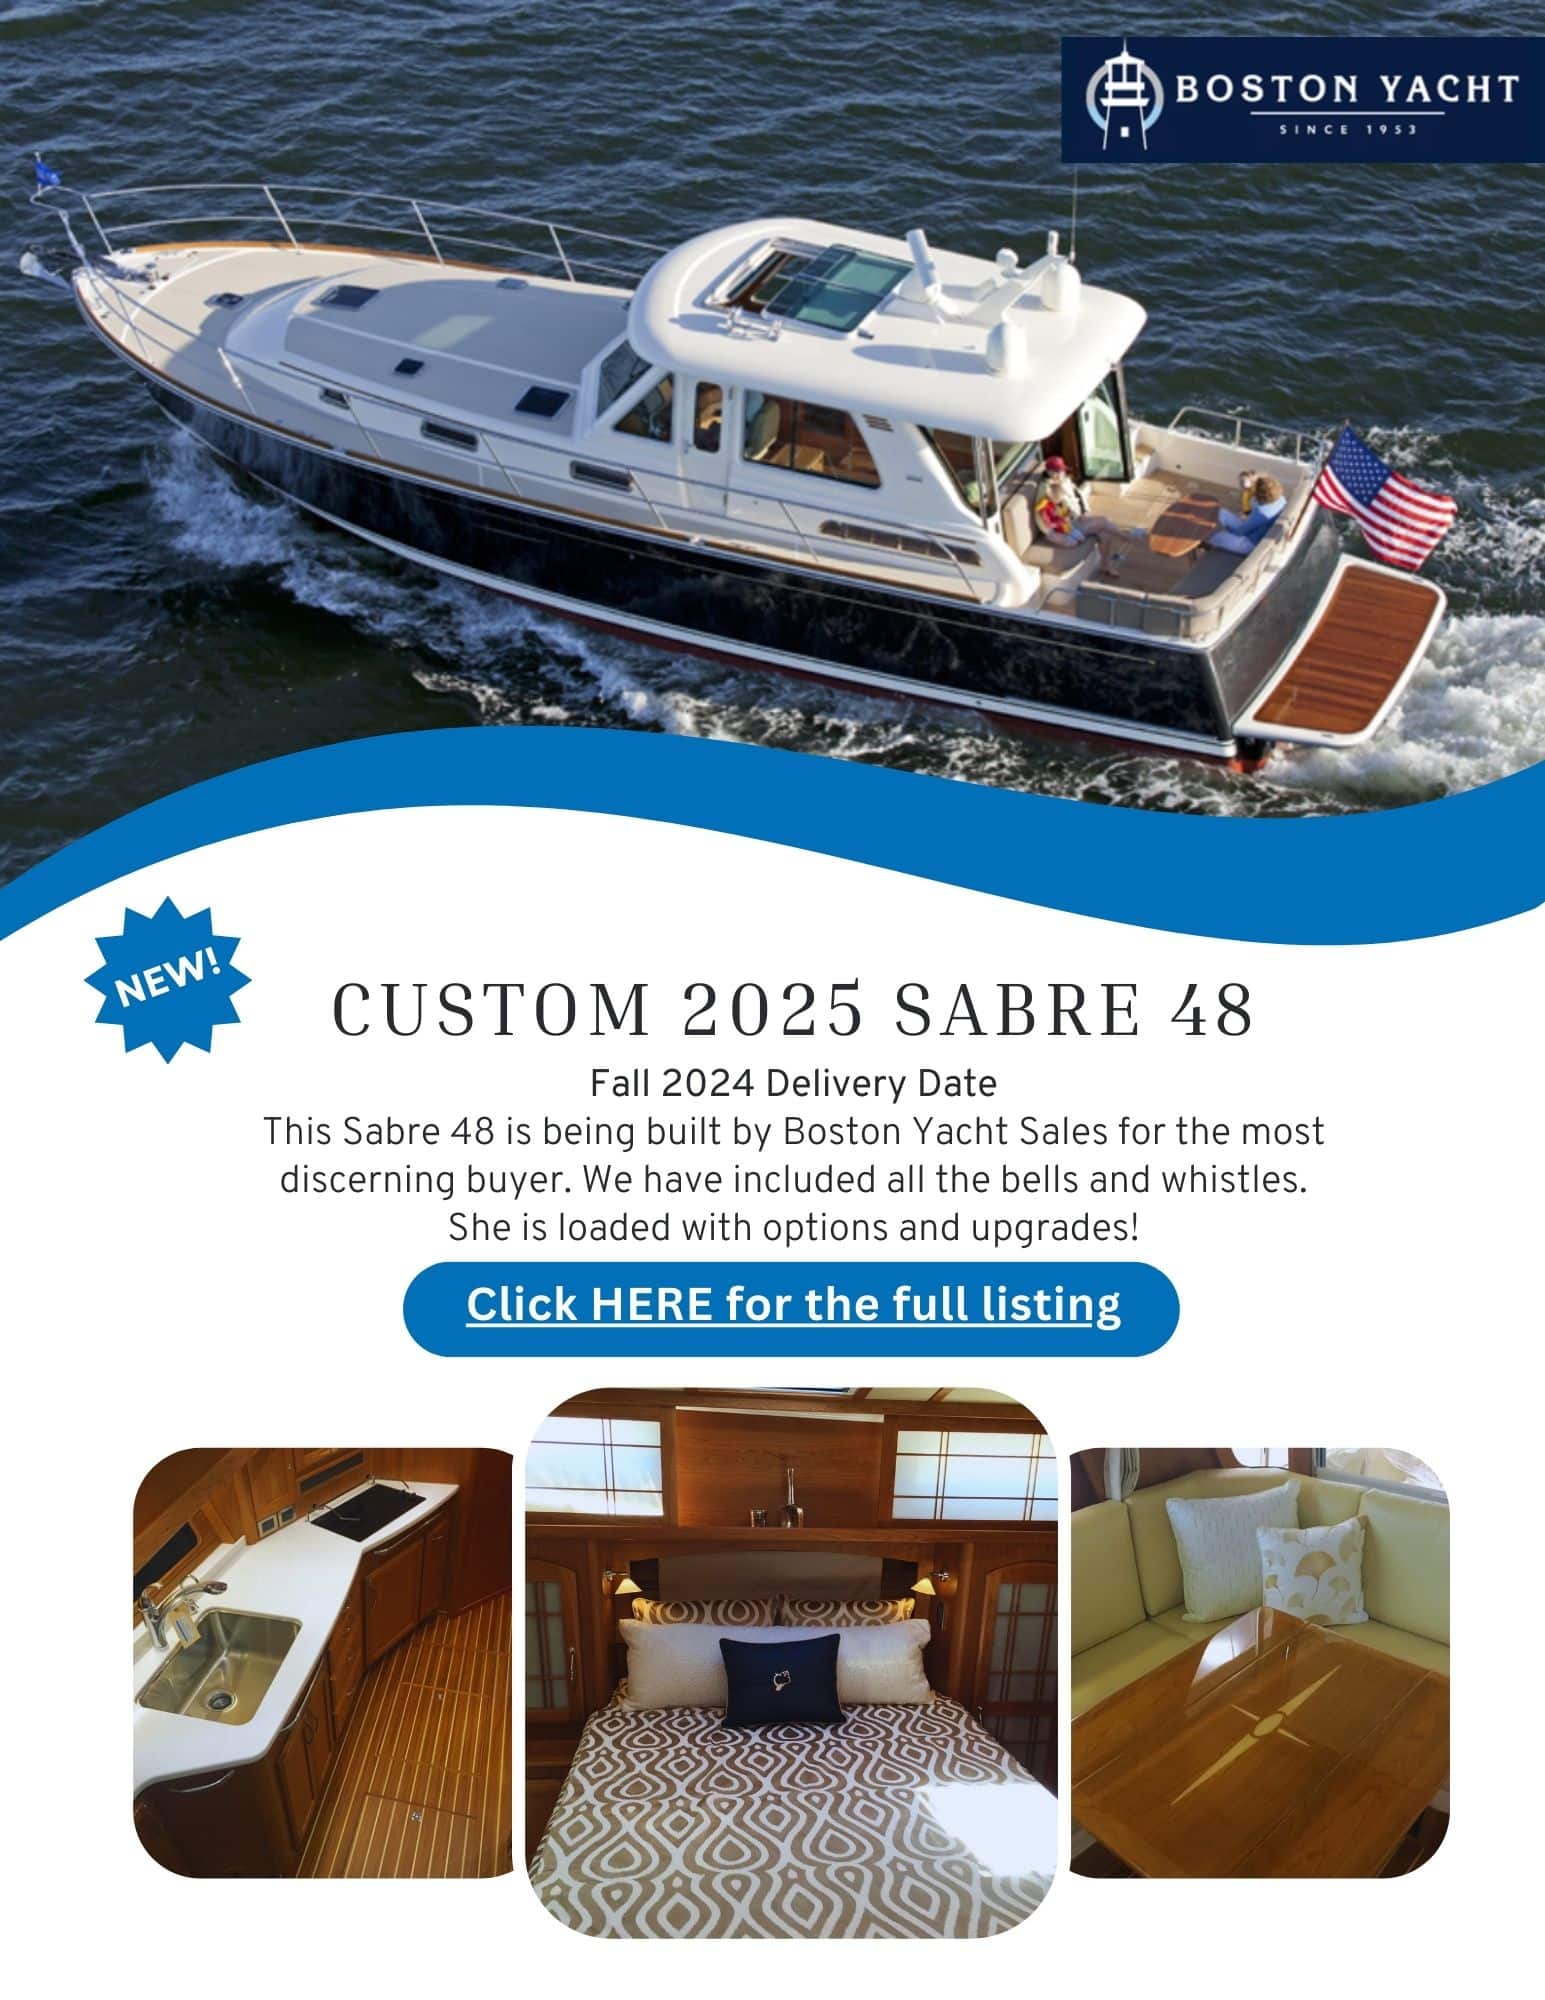 Check out the all new 2025 Sabre 48 Salon Express, Fall '24 Delivery!